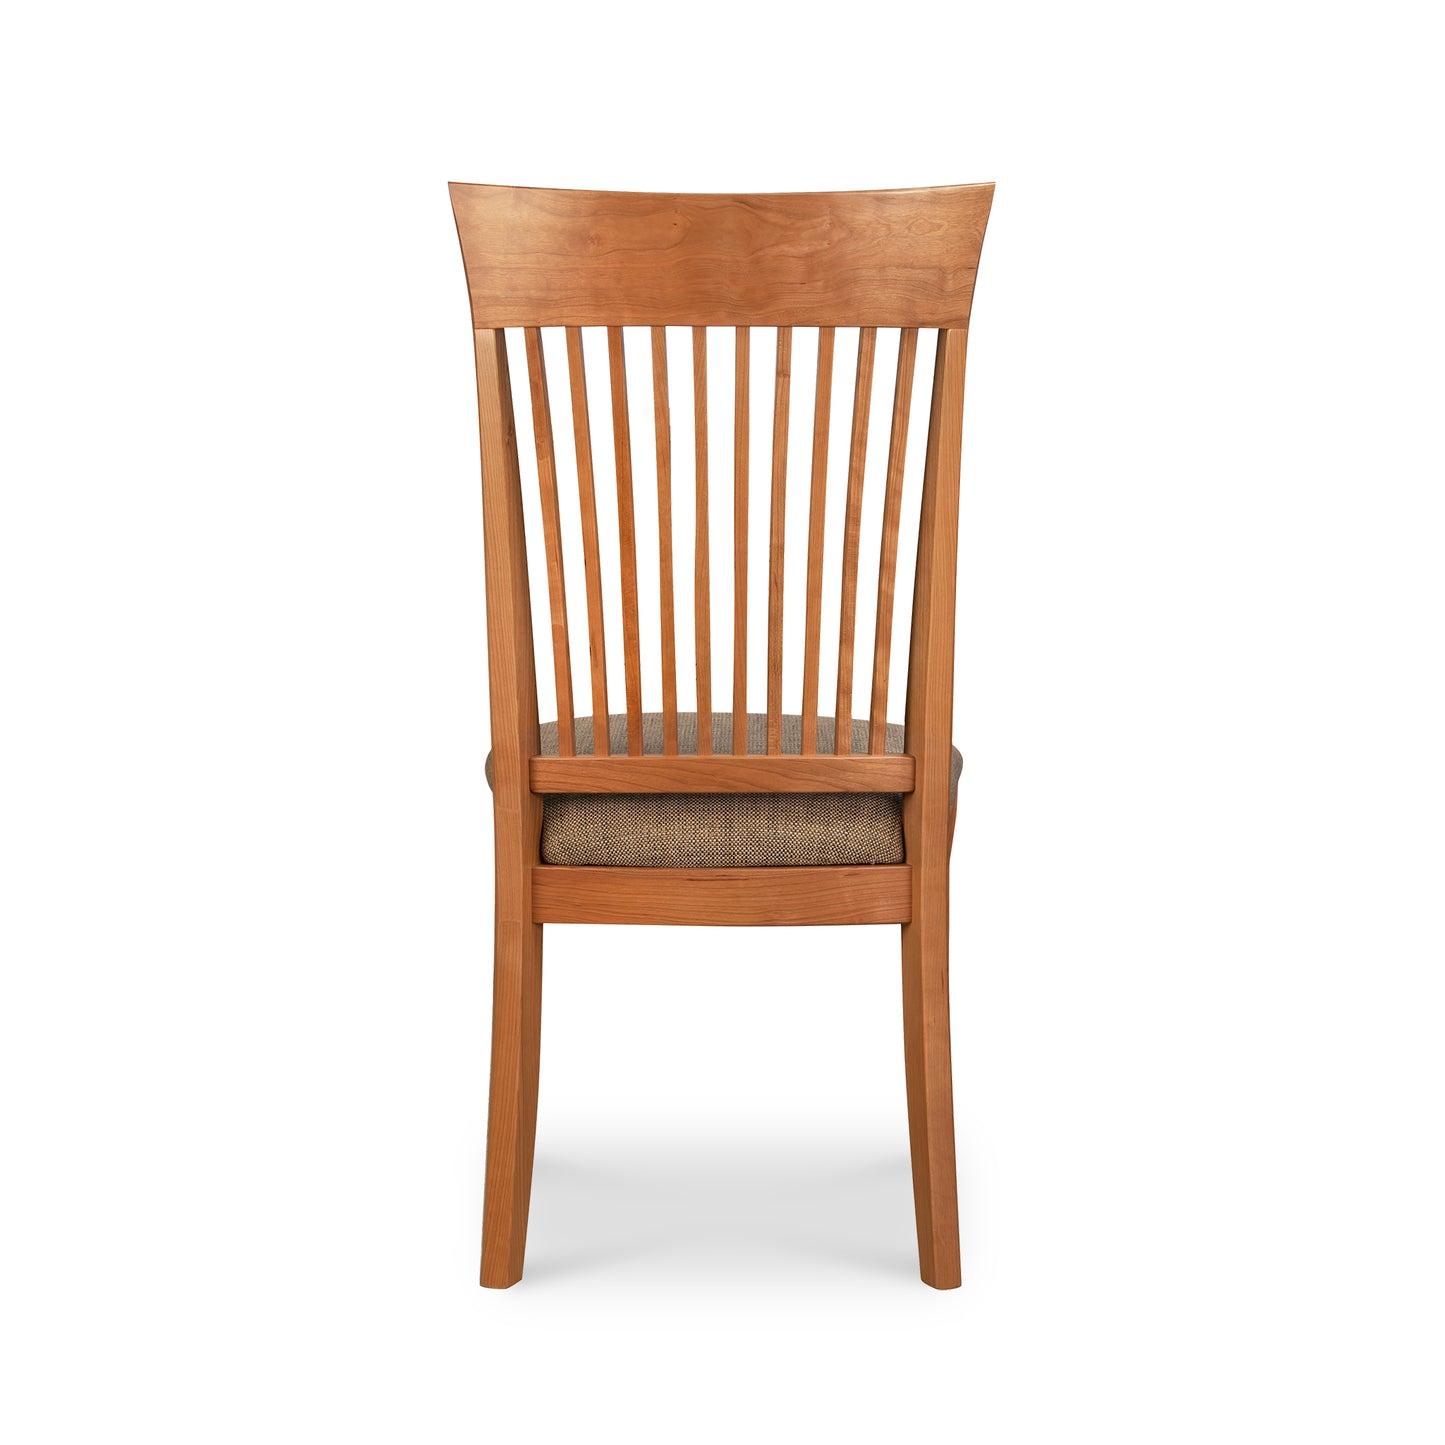 A Vermont Woods Studios Contemporary Shaker Side Chair 6-Piece Set - Clearance with vertical slats and a natural cherry fabric seat cushion against a white background.